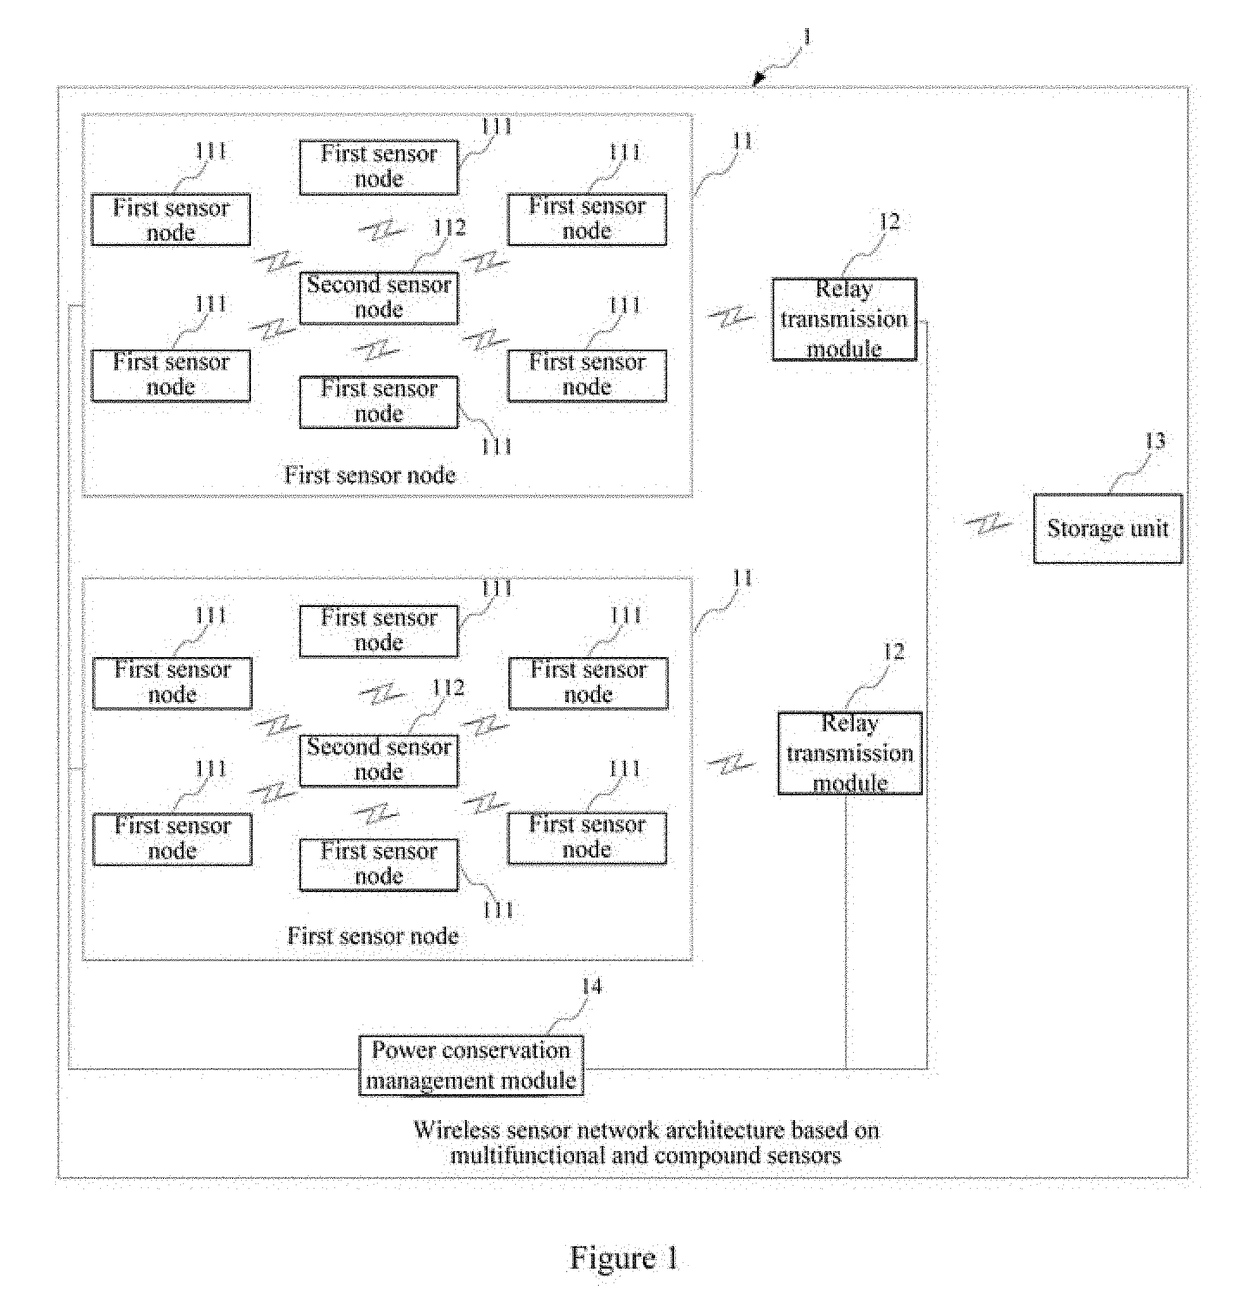 Wireless sensor network architecture based on multifuctional and compound sensors